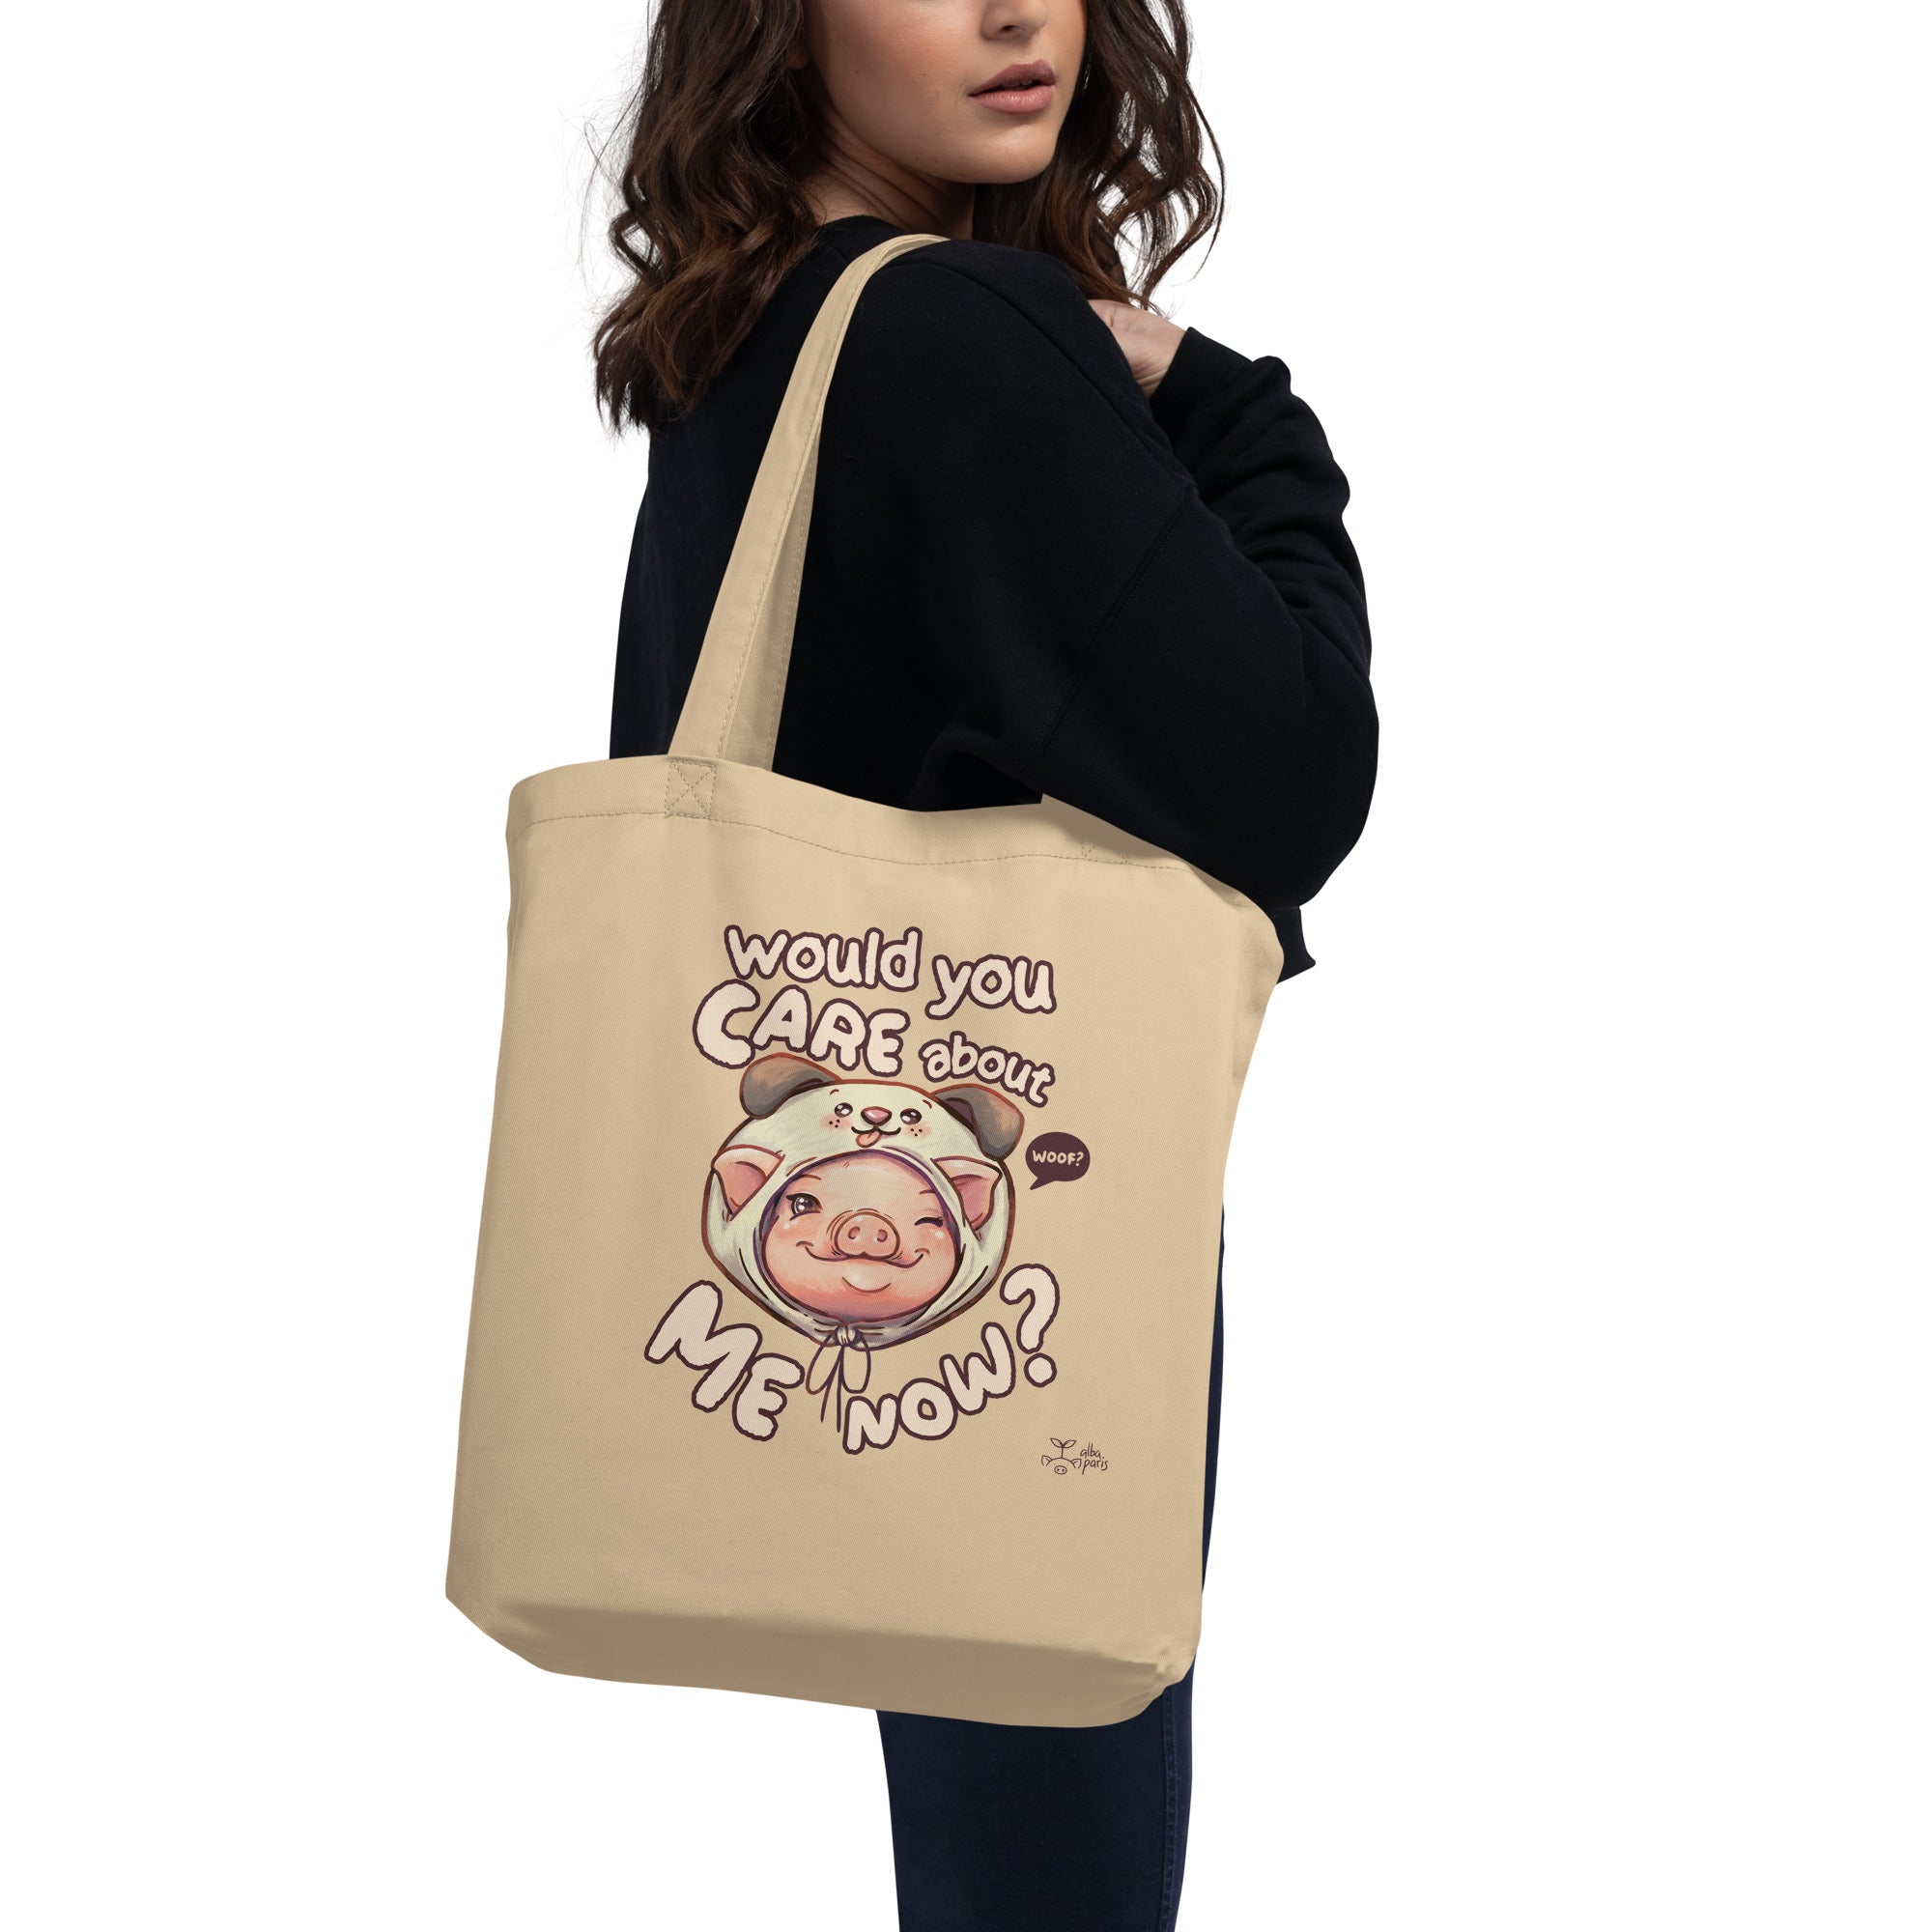 Would You Care About Me Now? Pig Organic Shopping Bags